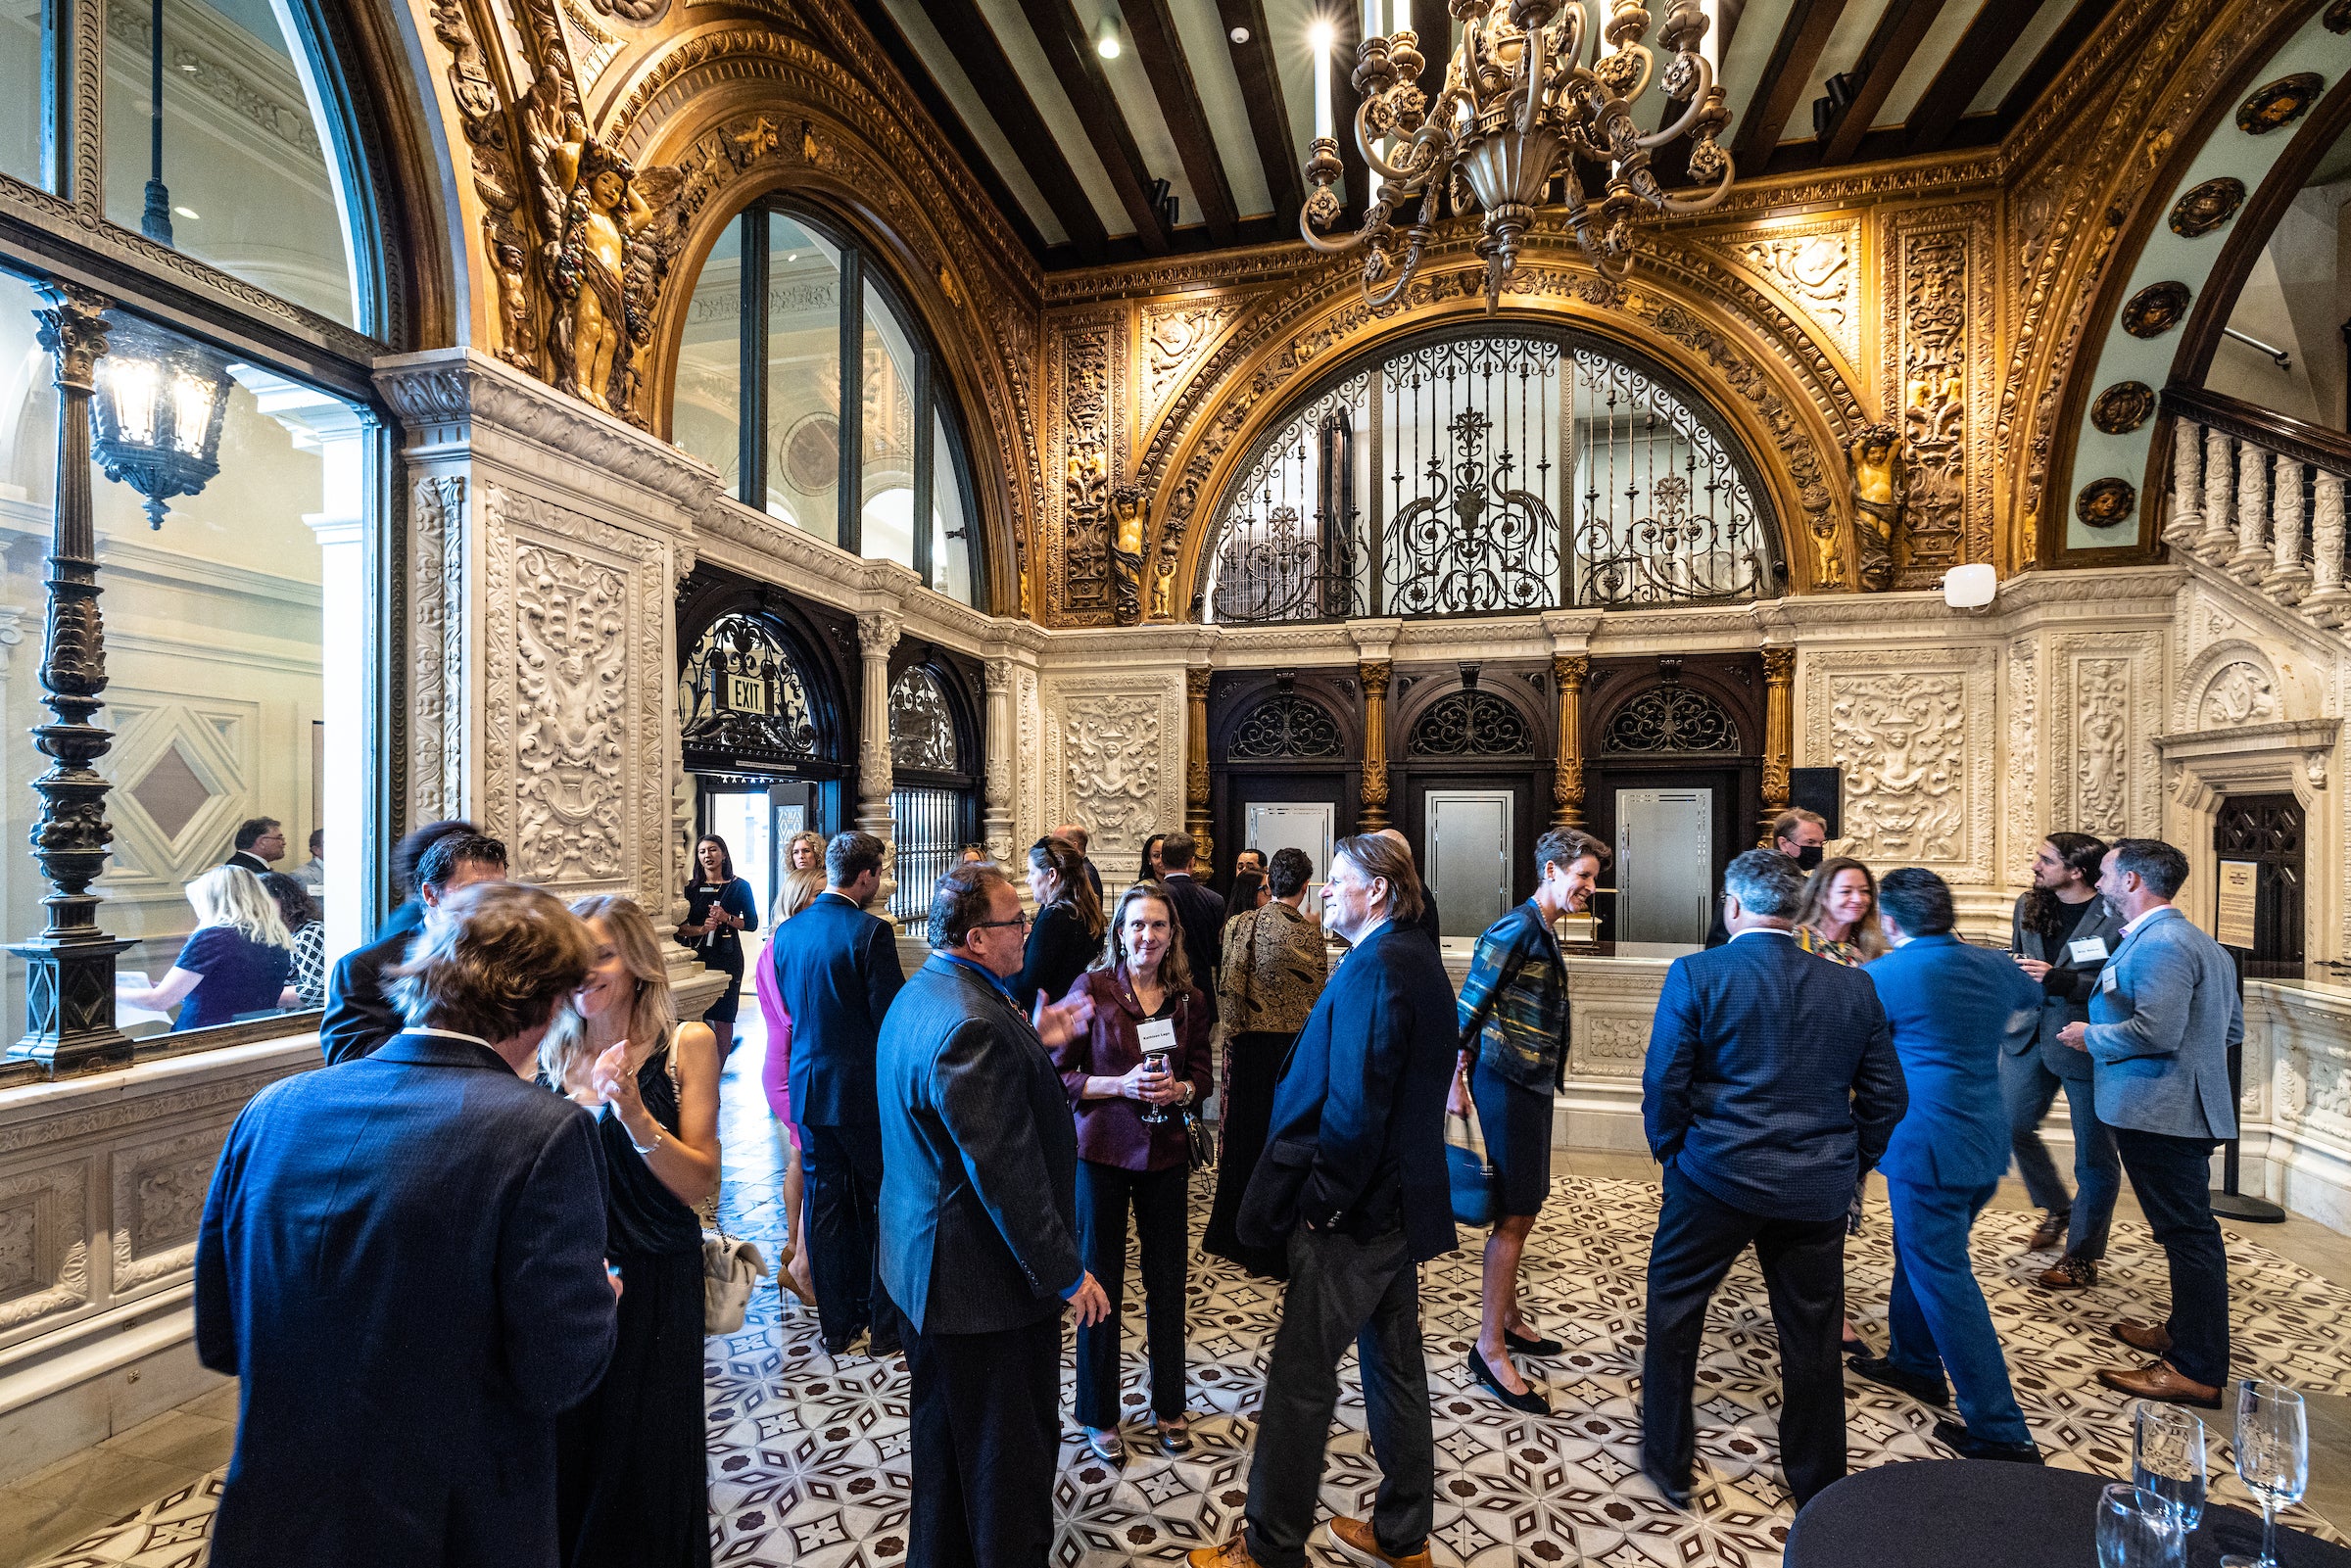 People standing in lobby of historic building in LA